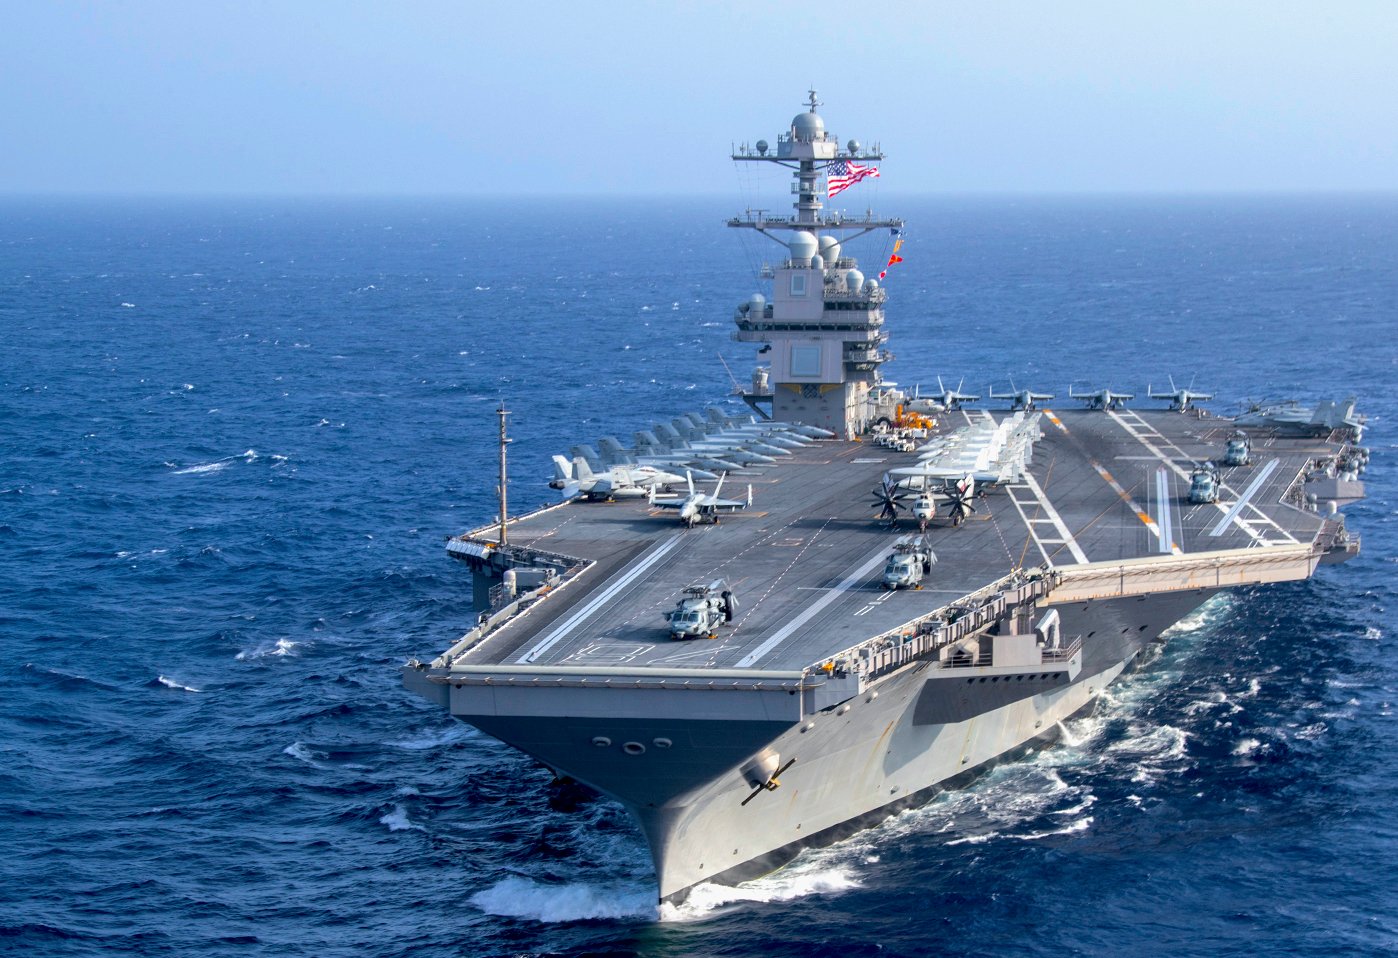 USS Gerald Ford: Mosta advanced aircraft carrier in the world